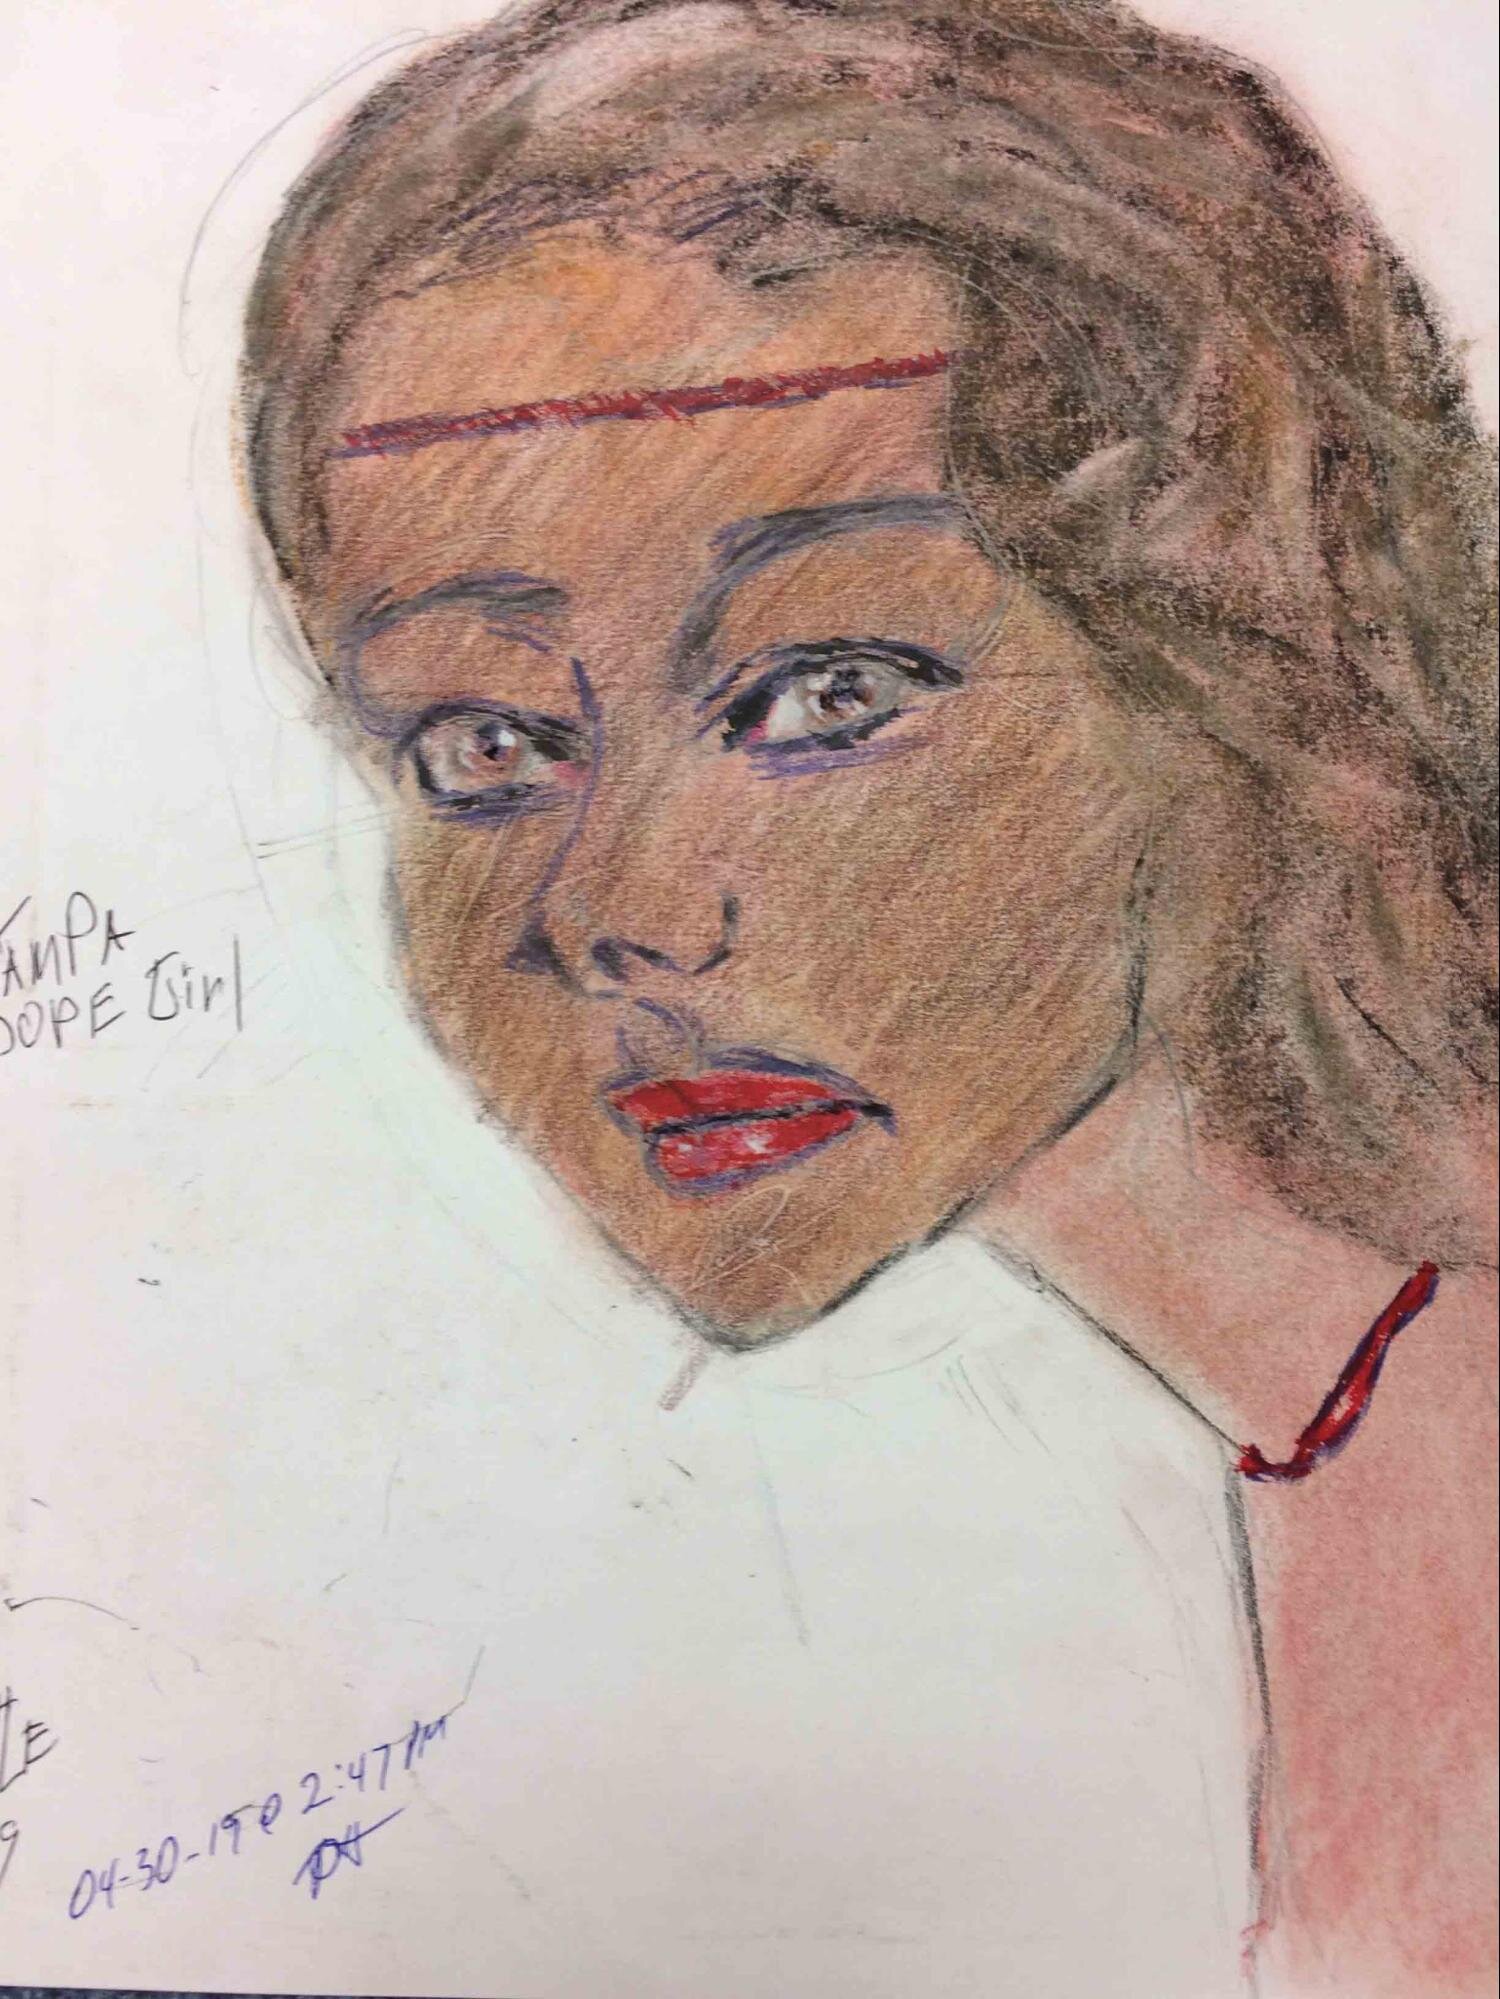   Tampa Dope Girl, adorned with a matching red headband and choker, may have had ties to the local drug scene and was allegedly killed in 1984.  